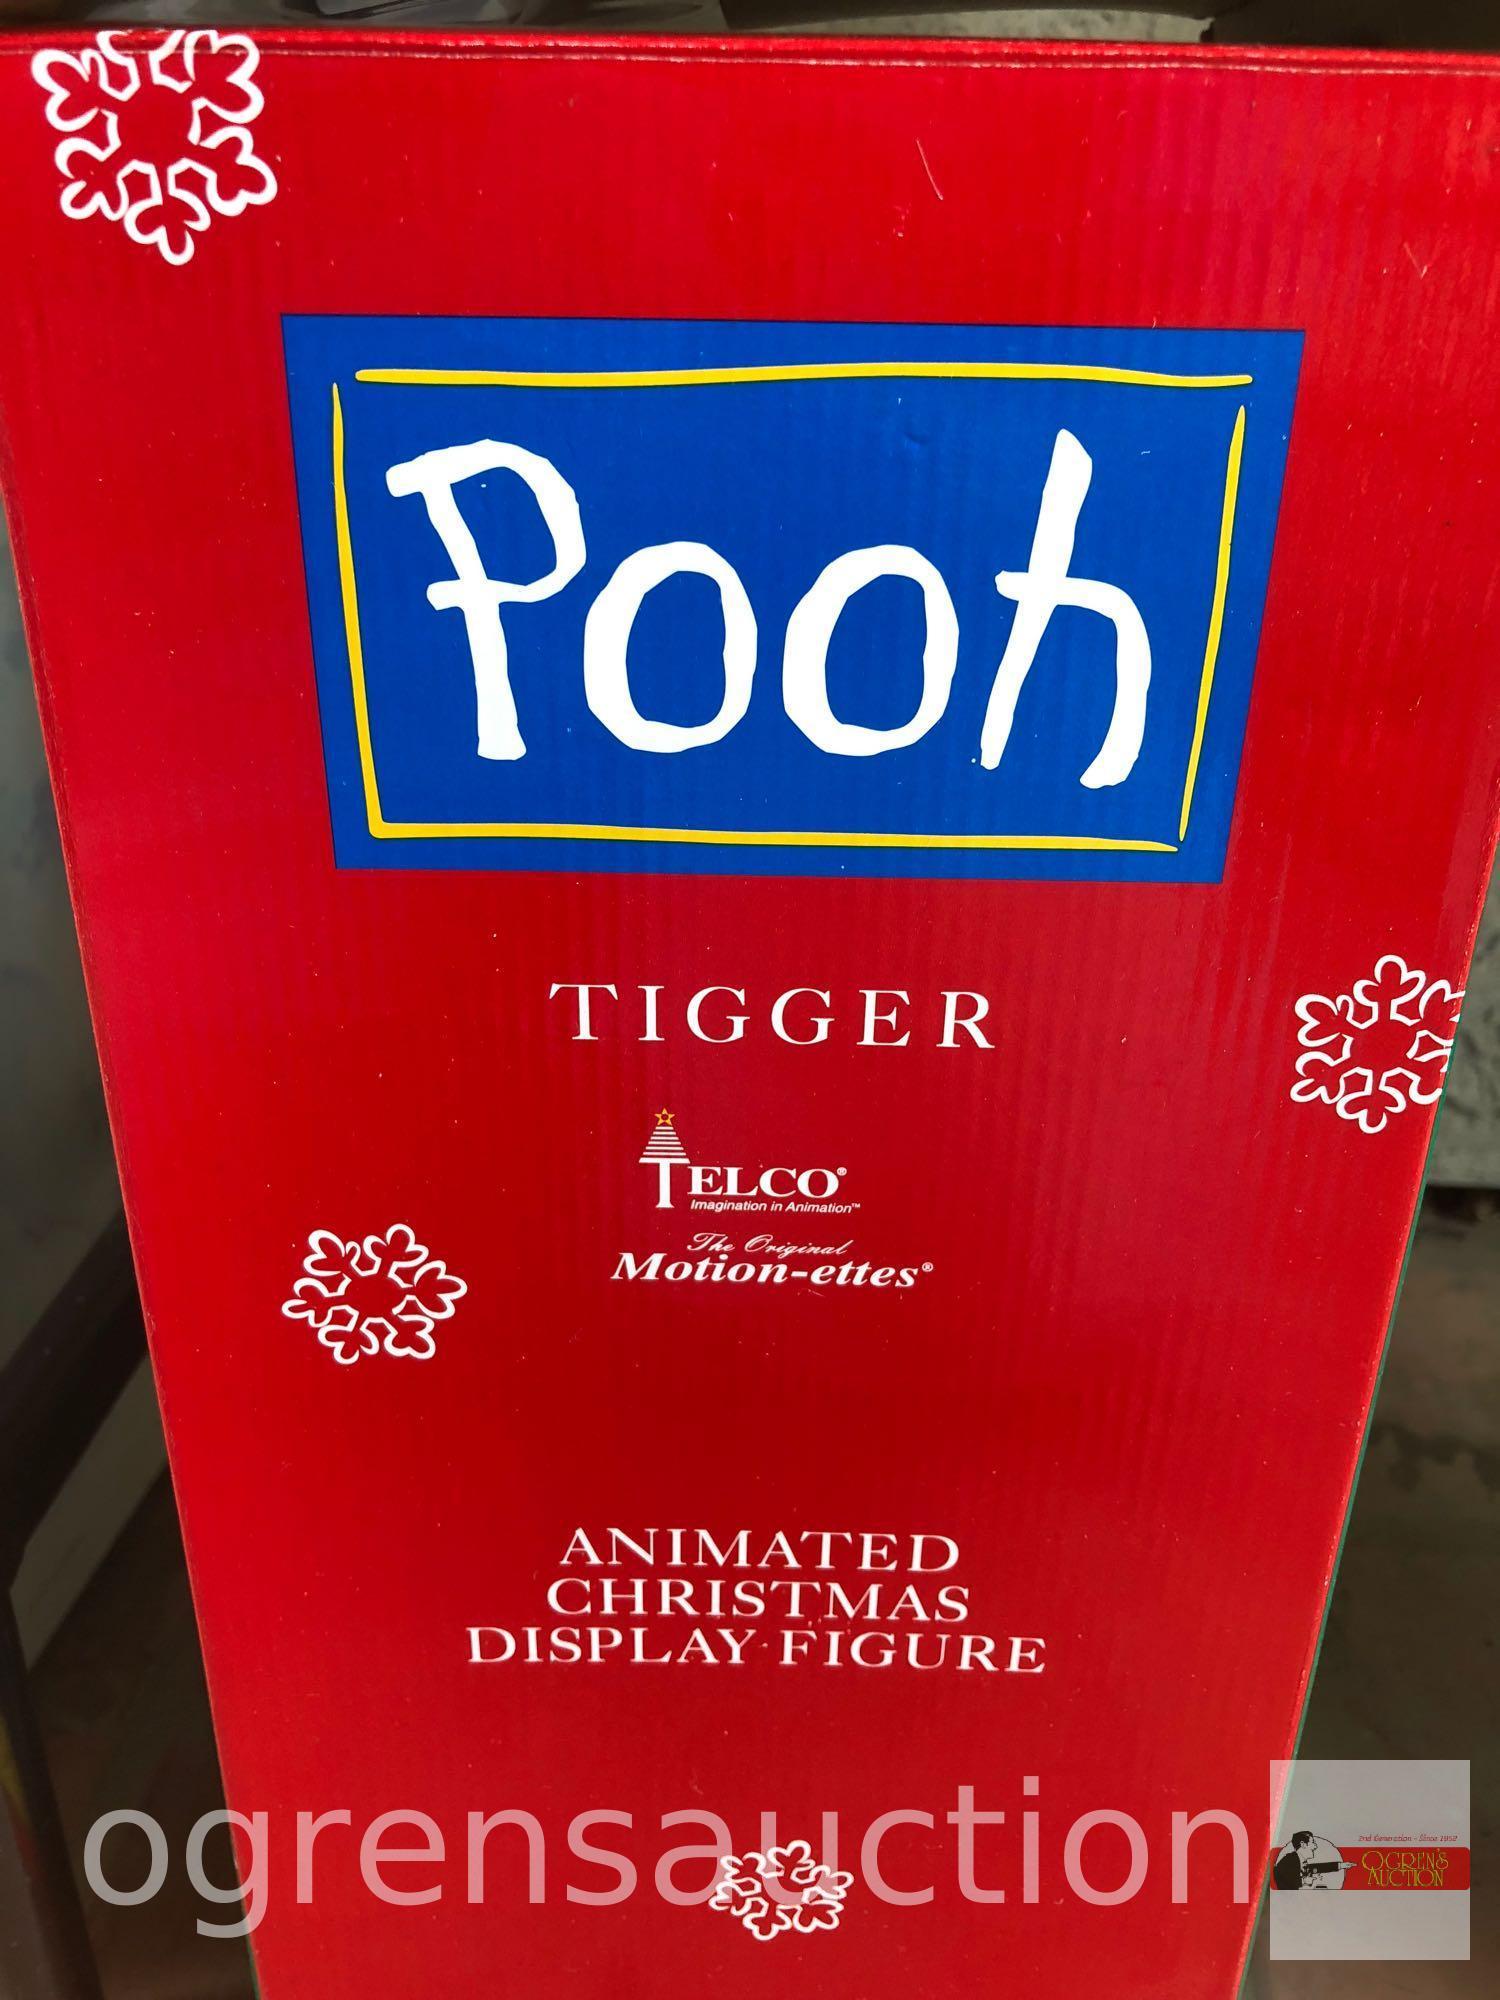 Christmas animated display figure - Pooh "Tigger", new in box, 16"h